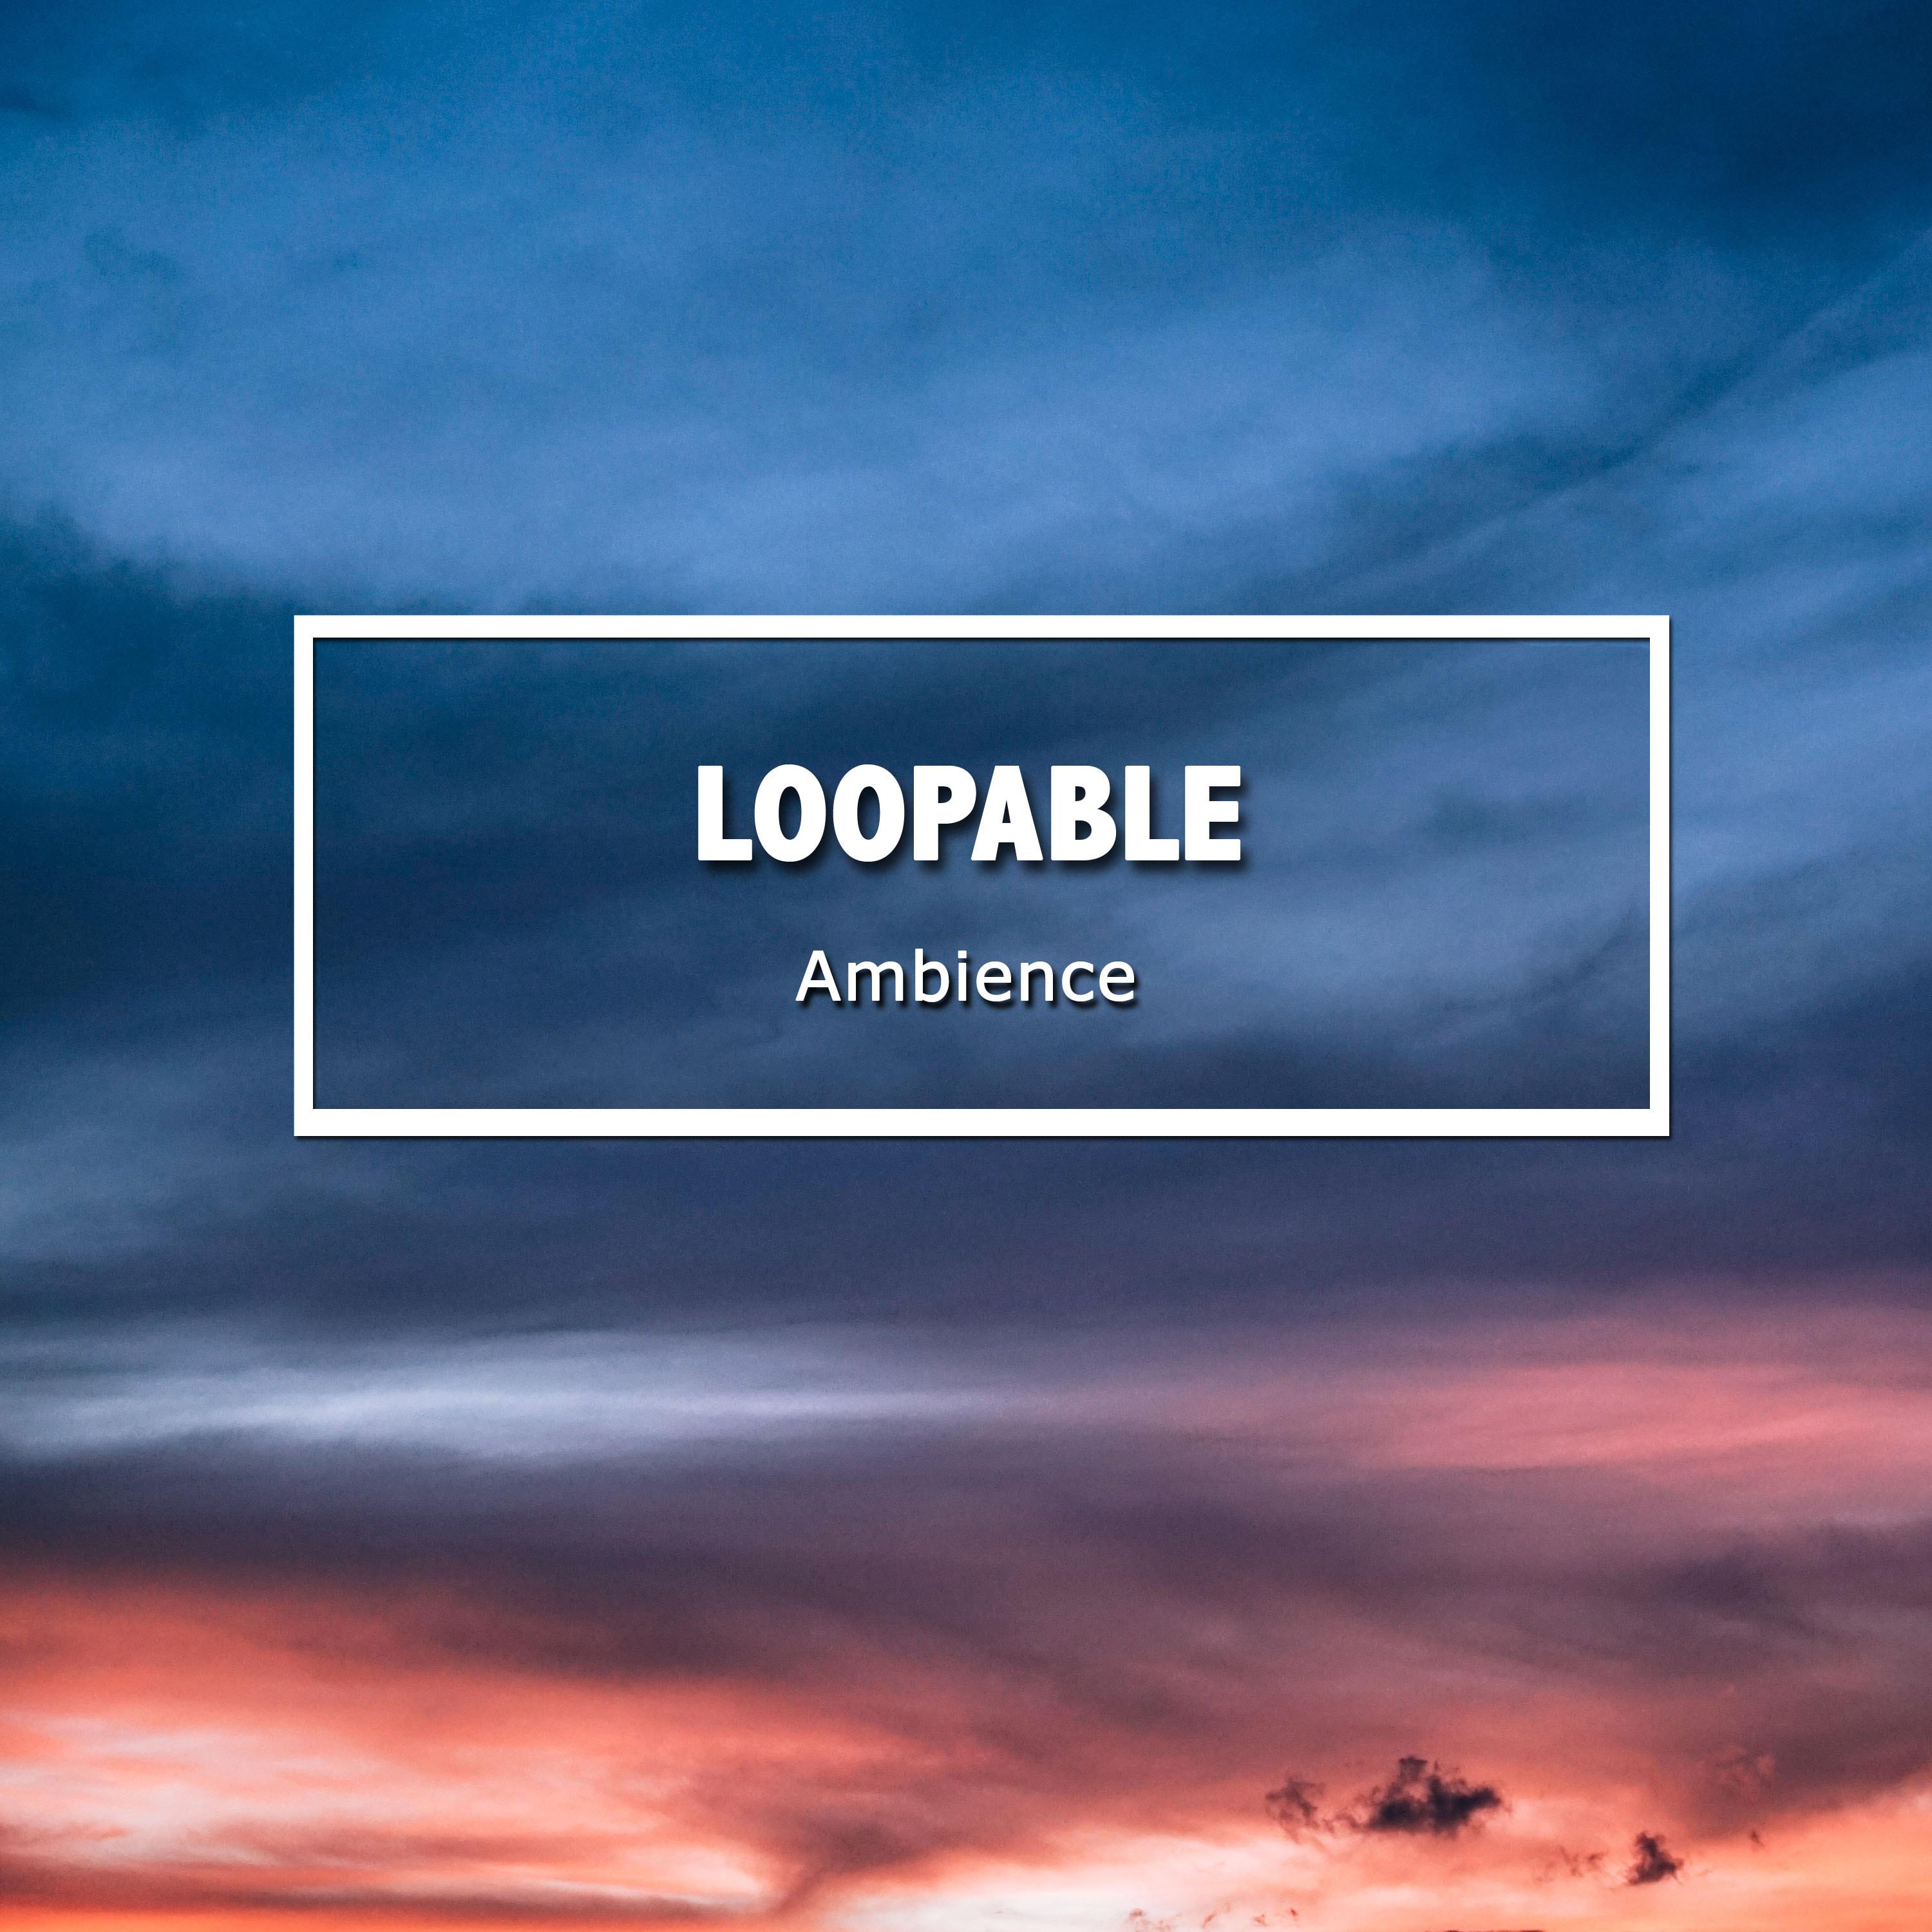 #11 Loopable Ambience Sounds to Invigorate Body and Soul